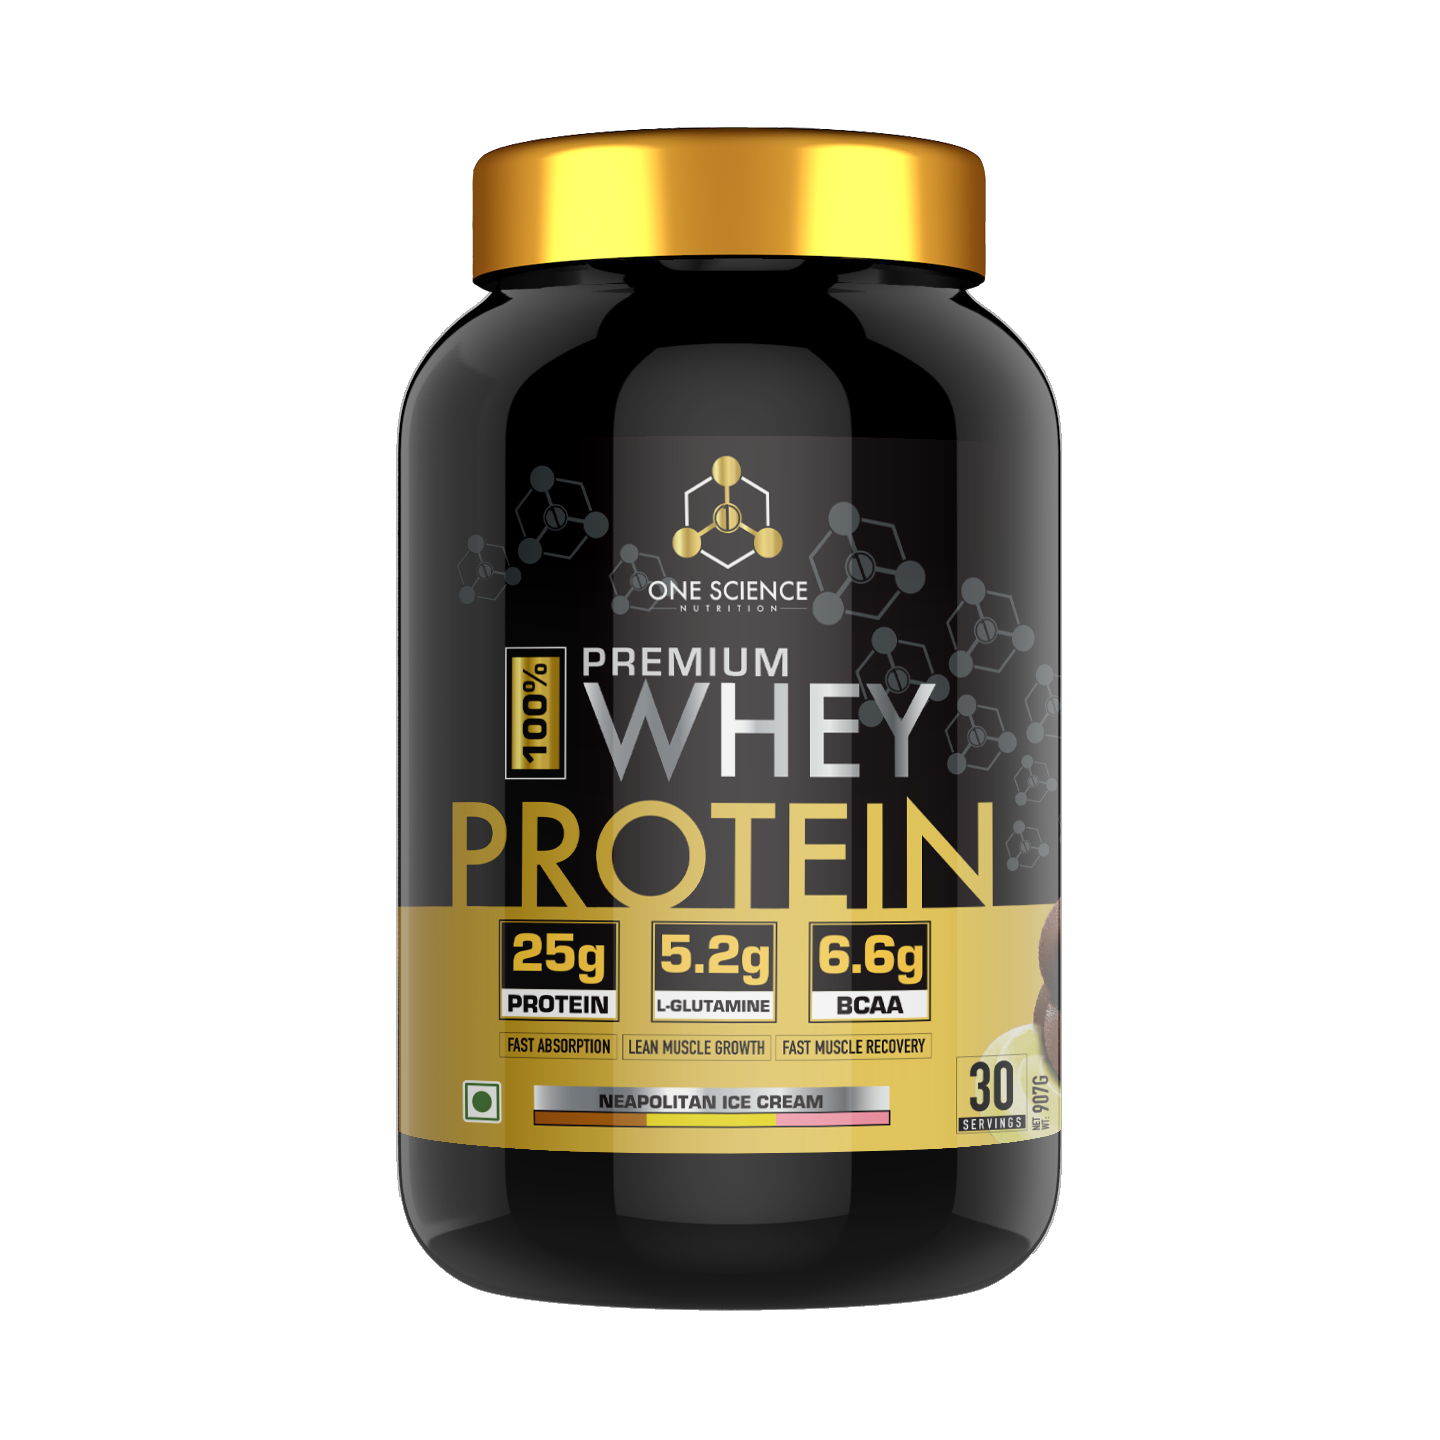 One Science 100 Premium Whey Protein - 30 Servings